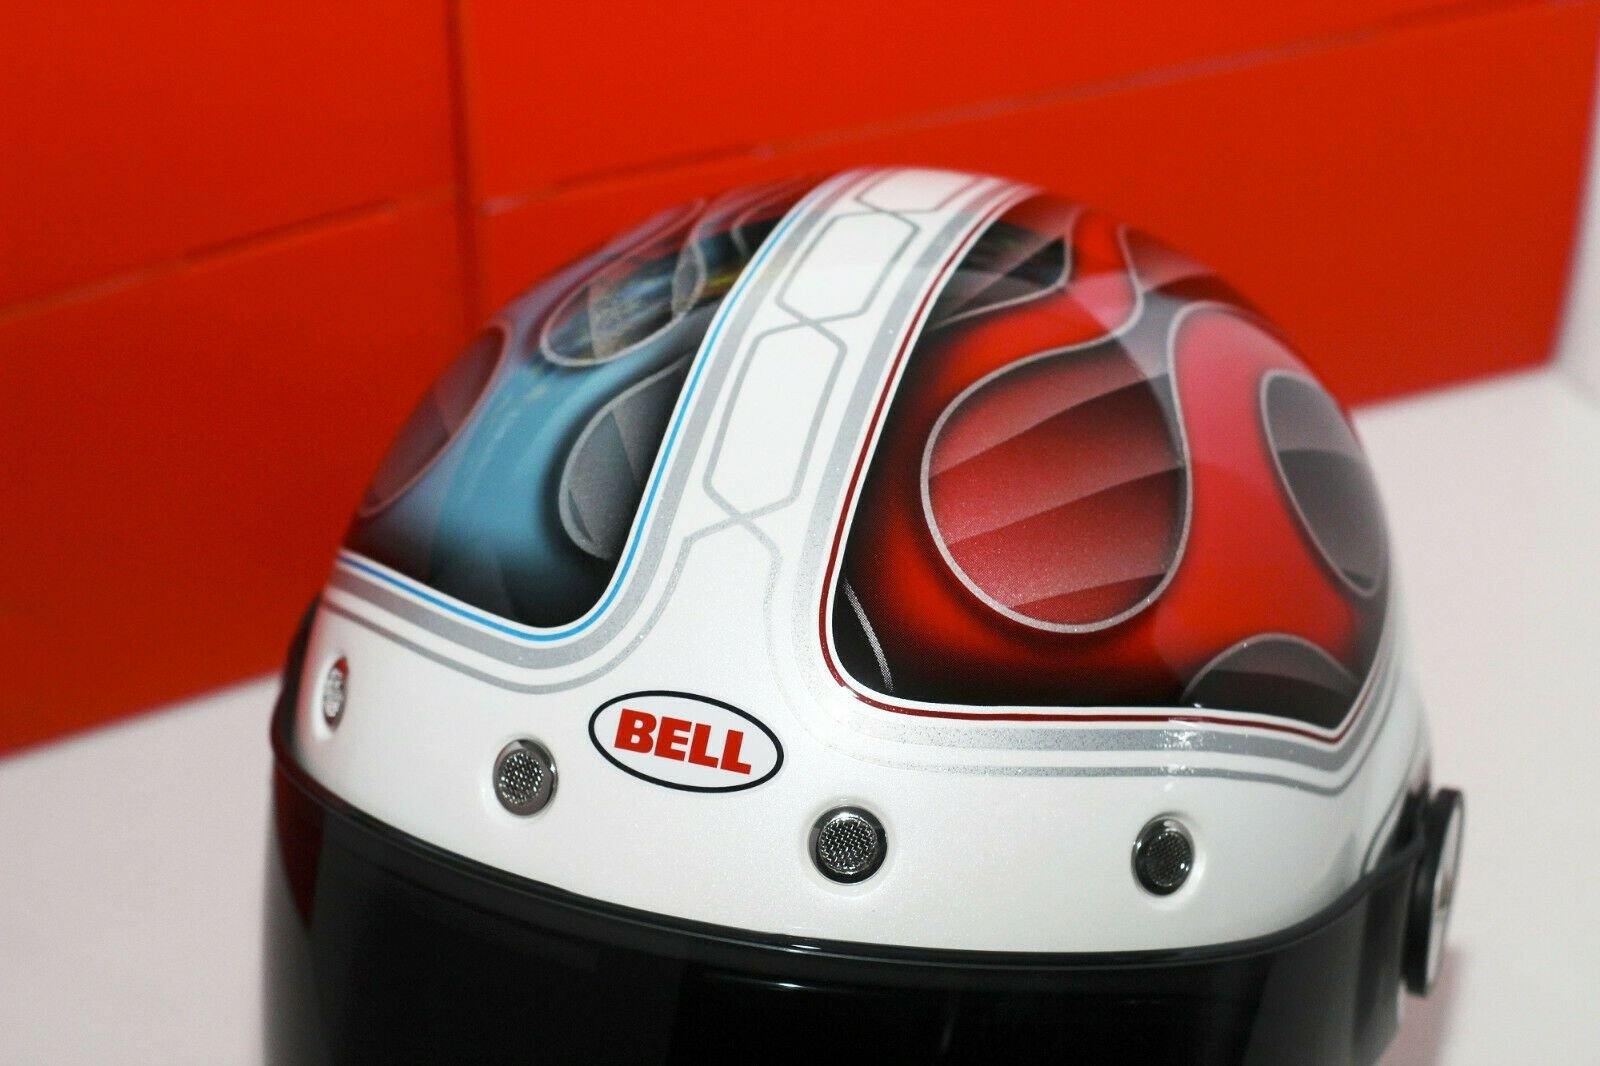 Bell Bullitt Special Edition (Barracuda White/Red/Blue) - Durian Bikers